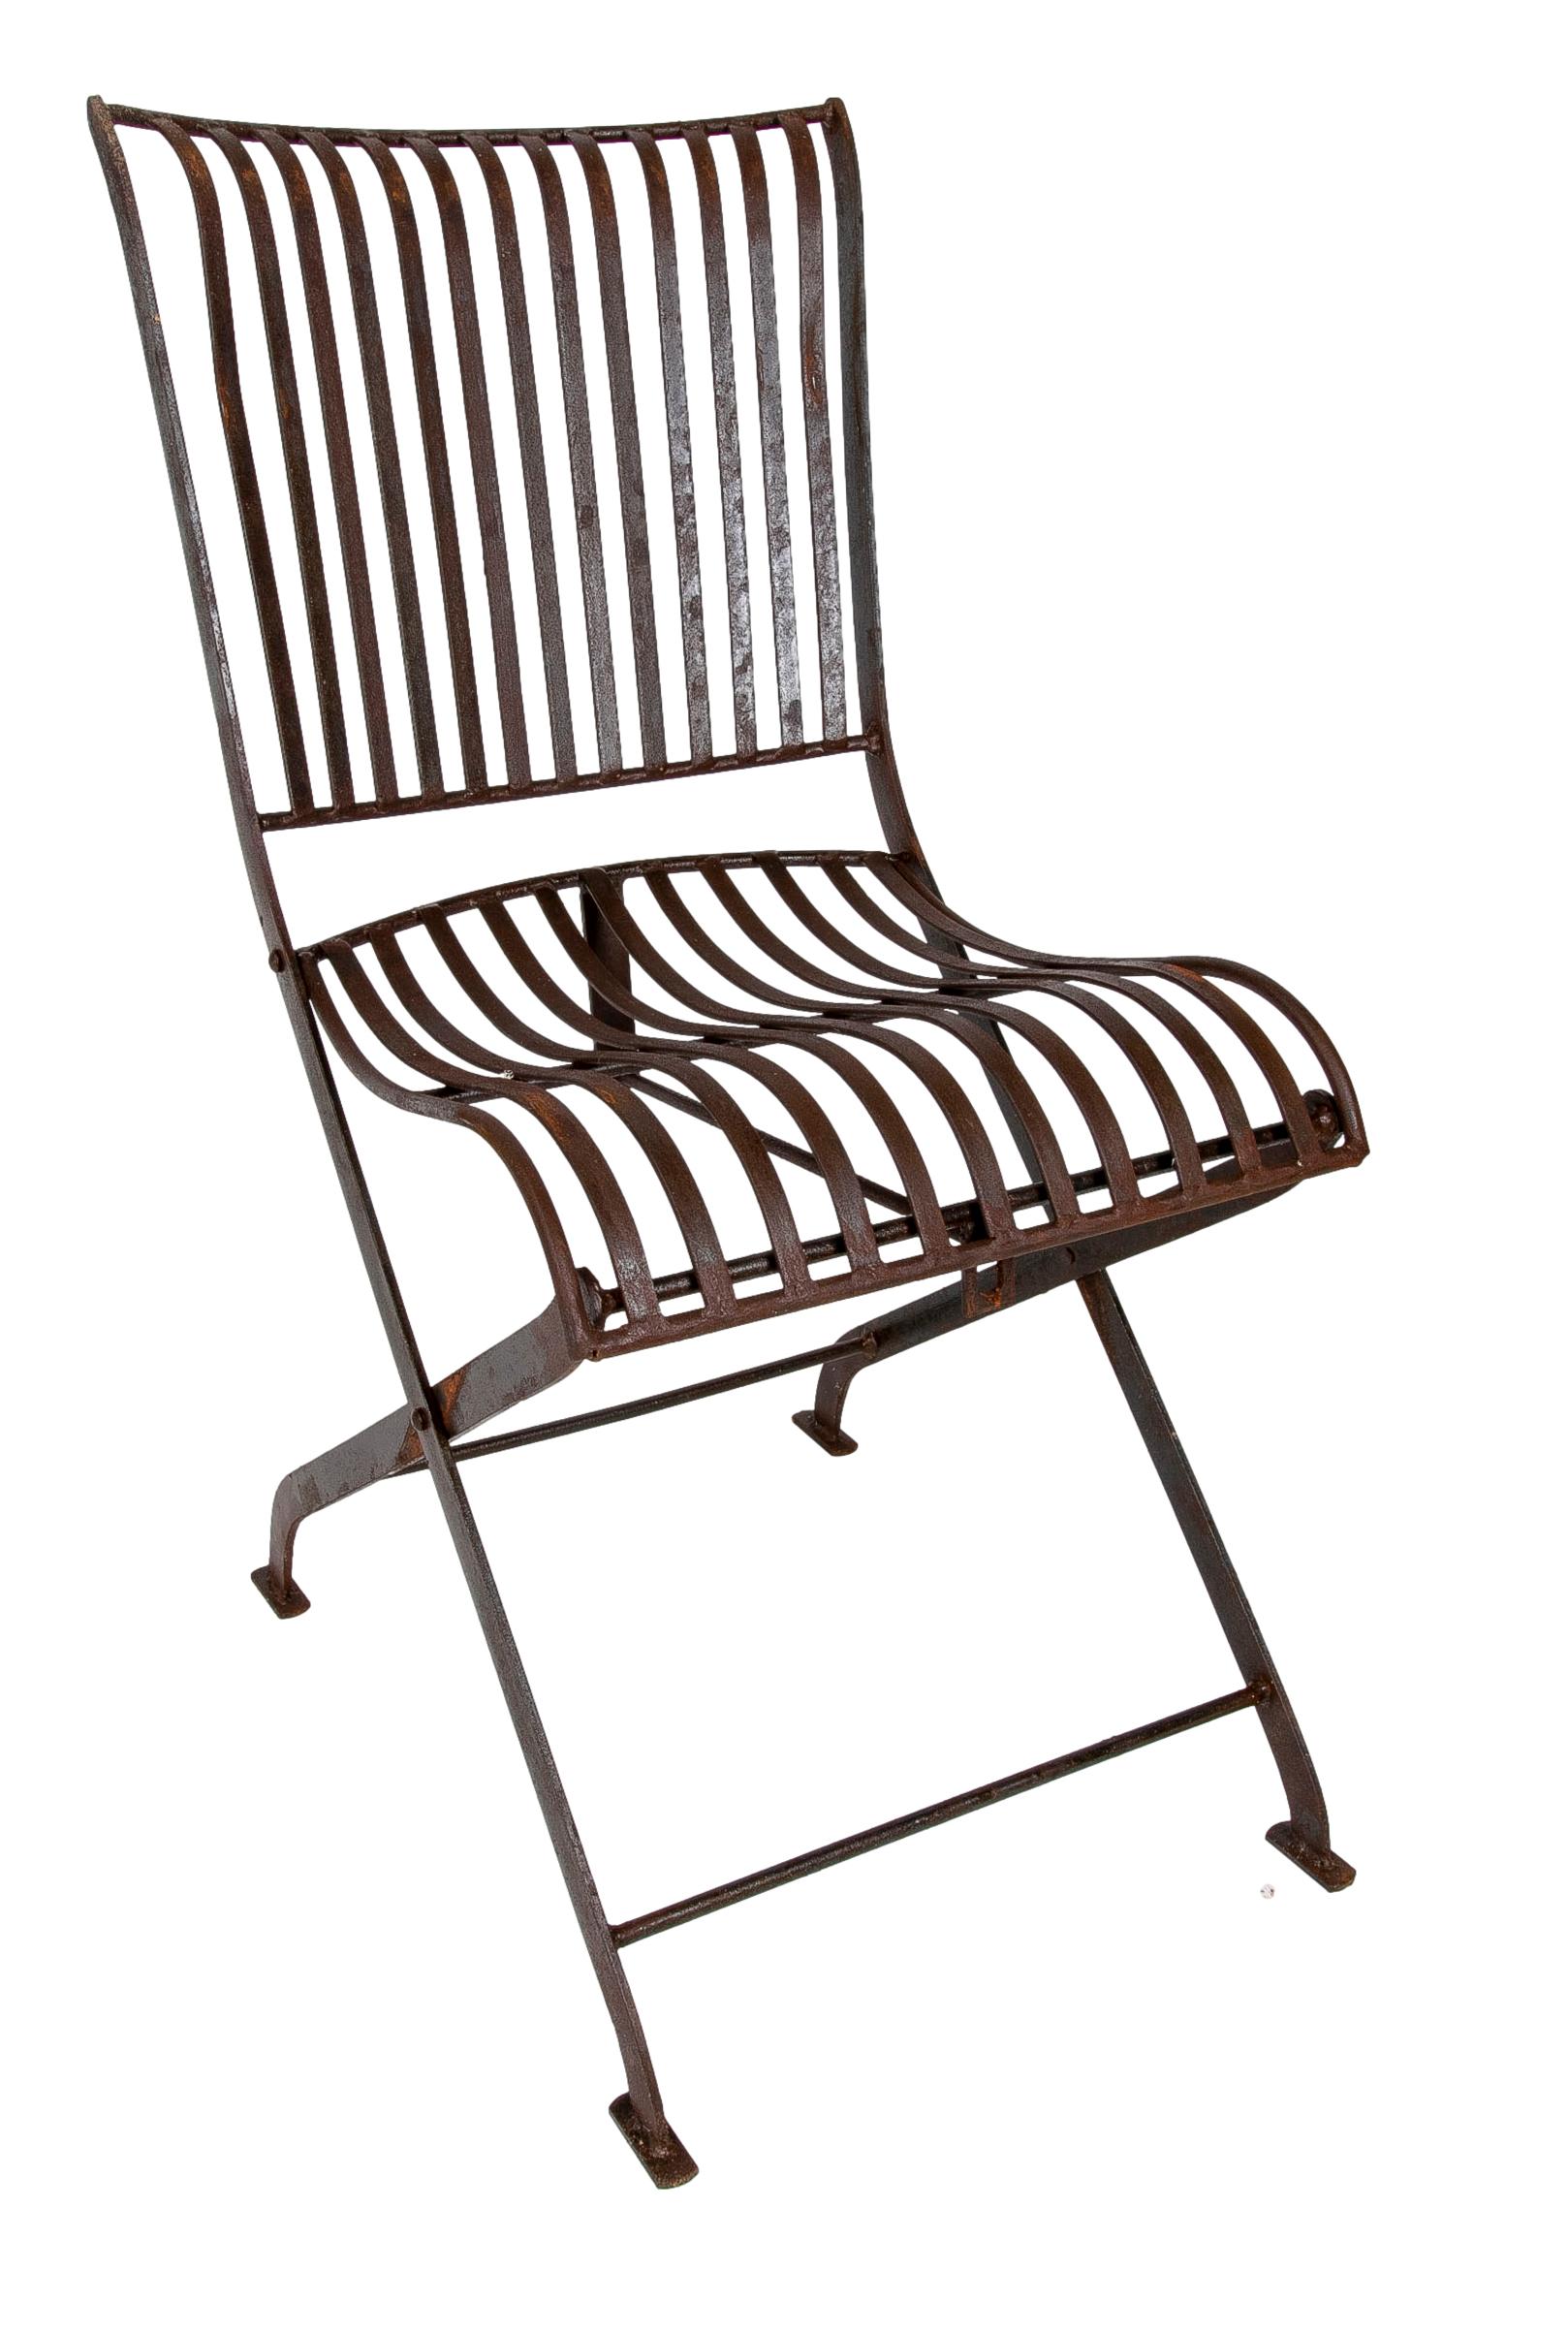 Contemporary Set of Four Foldable Iron Garden Chairs For Sale